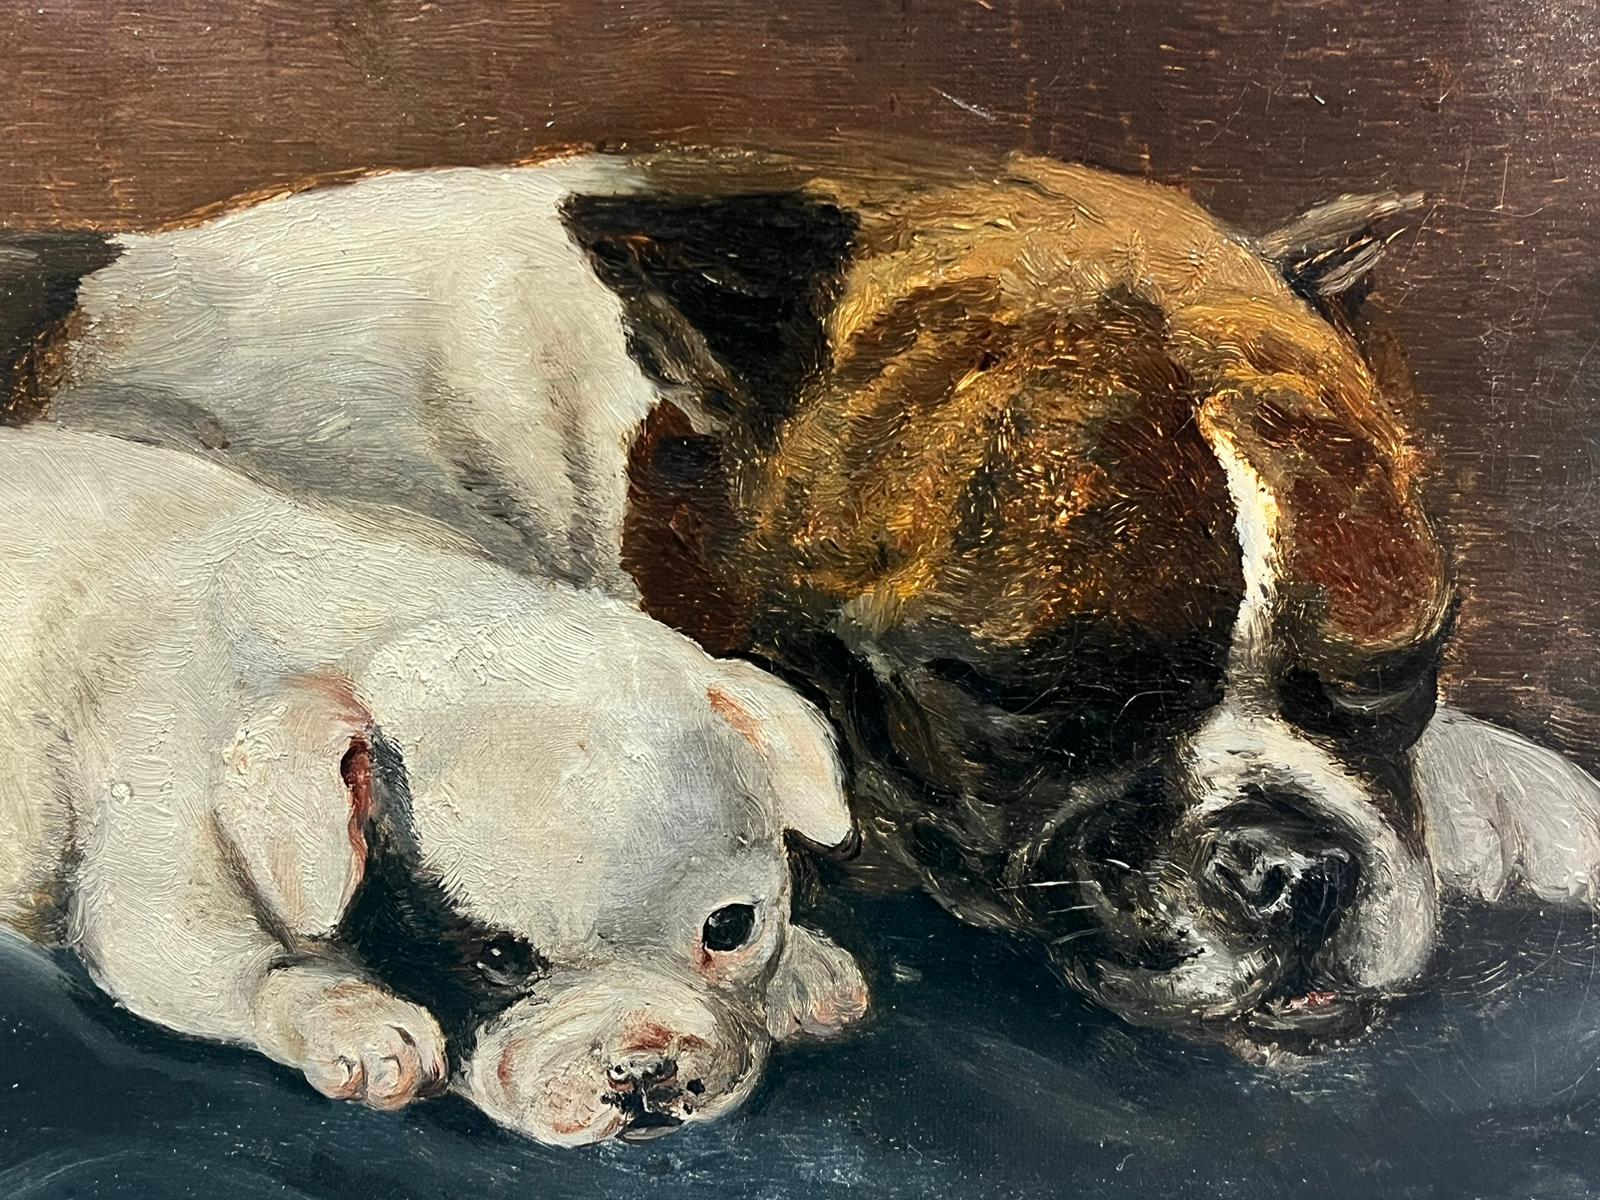 French School, 19th century
Bull Terrier and Pup
oil on canvas, framed
framed: 12 x 15.5 inches
canvas: 10 x 13 inches
provenance: private collection, UK
condition: very good and sound condition - damaged frame
